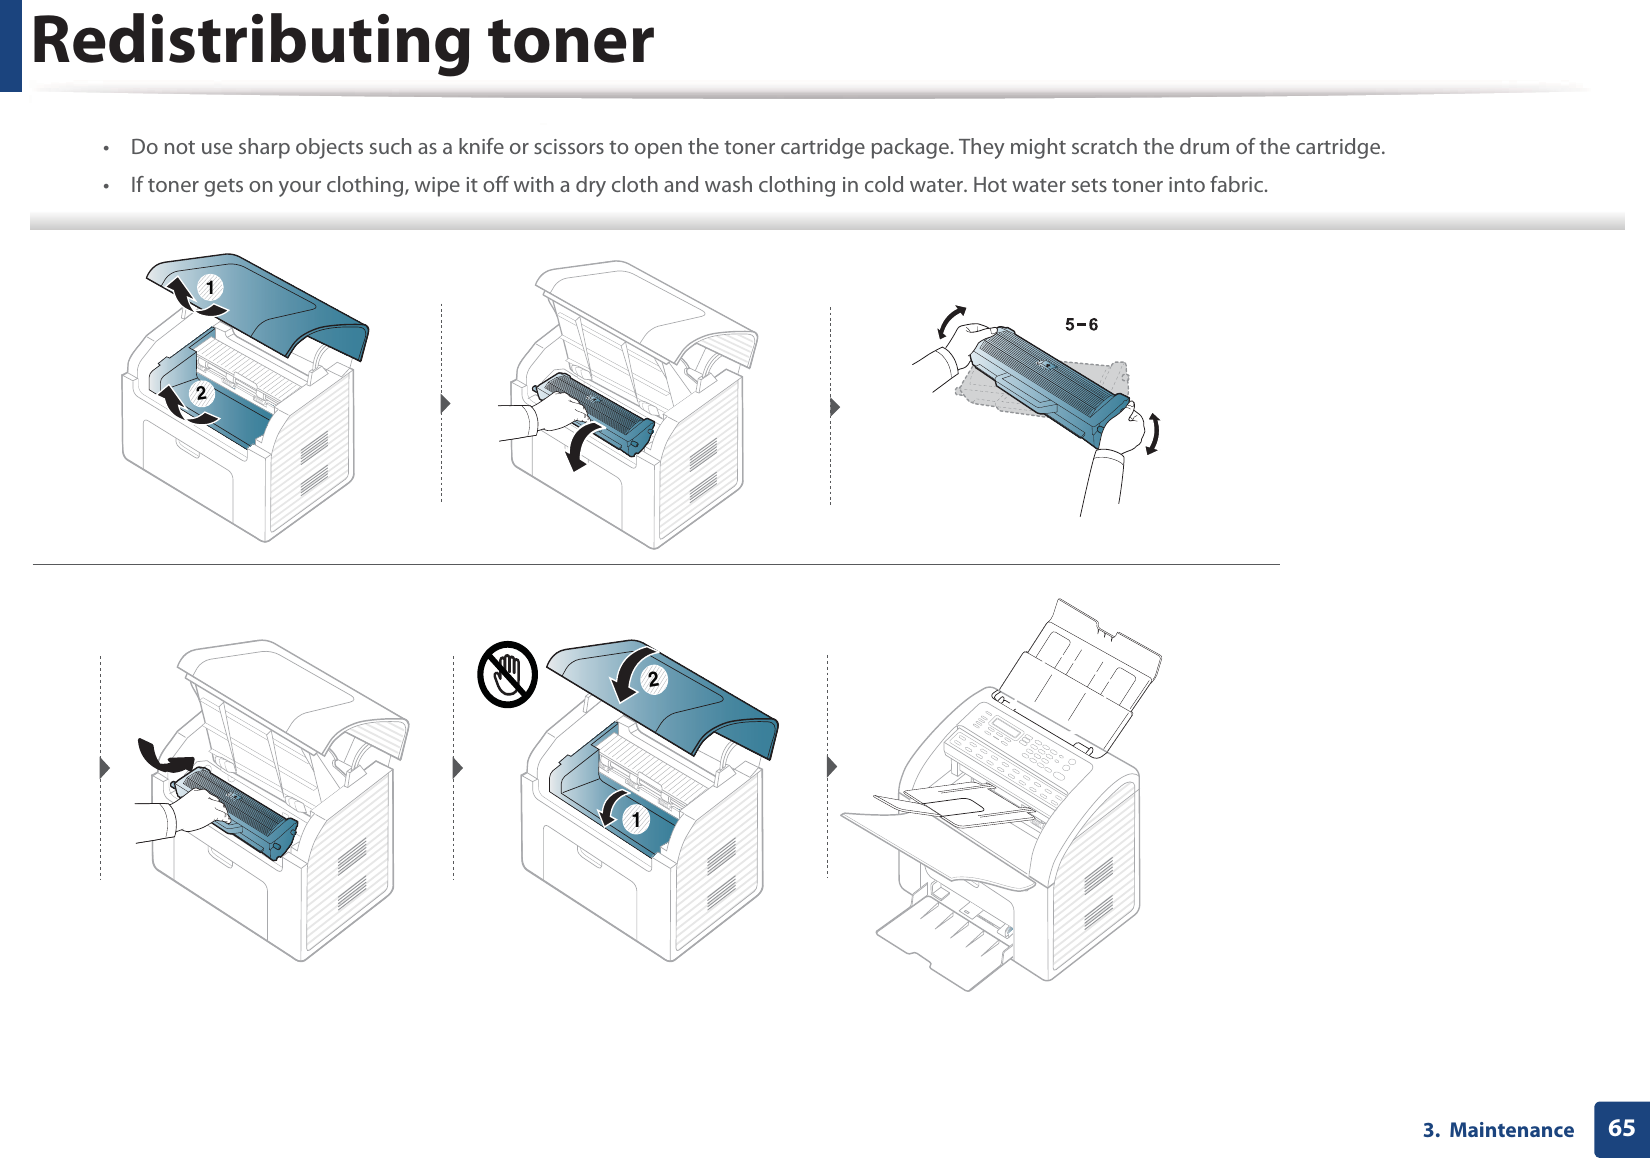 Redistributing toner653.  Maintenance• Do not use sharp objects such as a knife or scissors to open the toner cartridge package. They might scratch the drum of the cartridge.• If toner gets on your clothing, wipe it off with a dry cloth and wash clothing in cold water. Hot water sets toner into fabric.  211 2